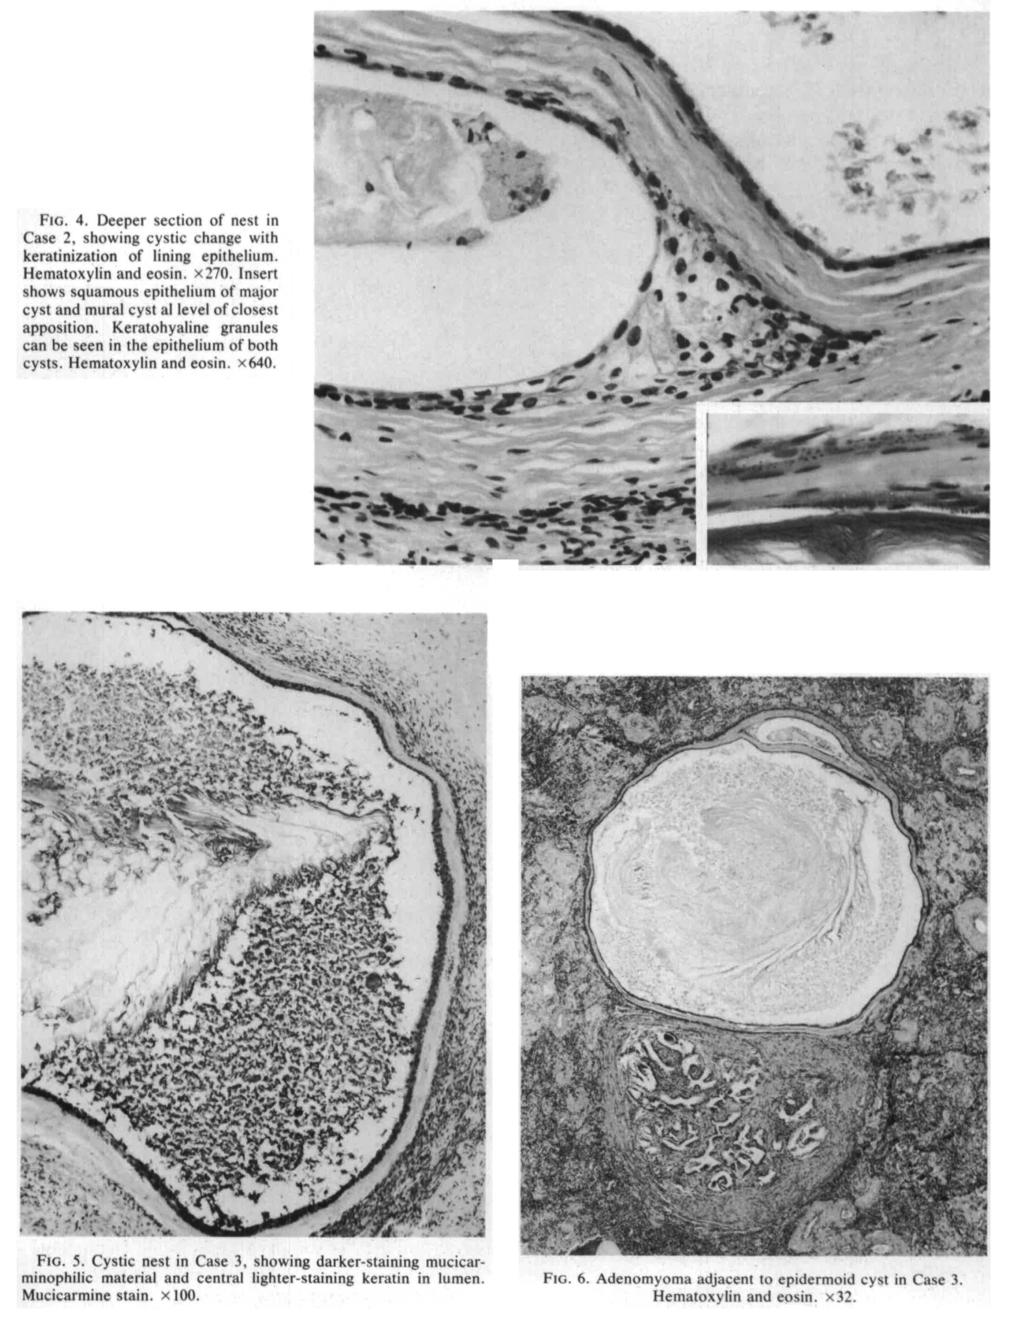 Vol. 7 No. CASE EPOTS 75 FIG. 4. Deeper section of nest in, showing cystic change with keratinization of lining epithelium. Hematoxylin and eosin. x70.